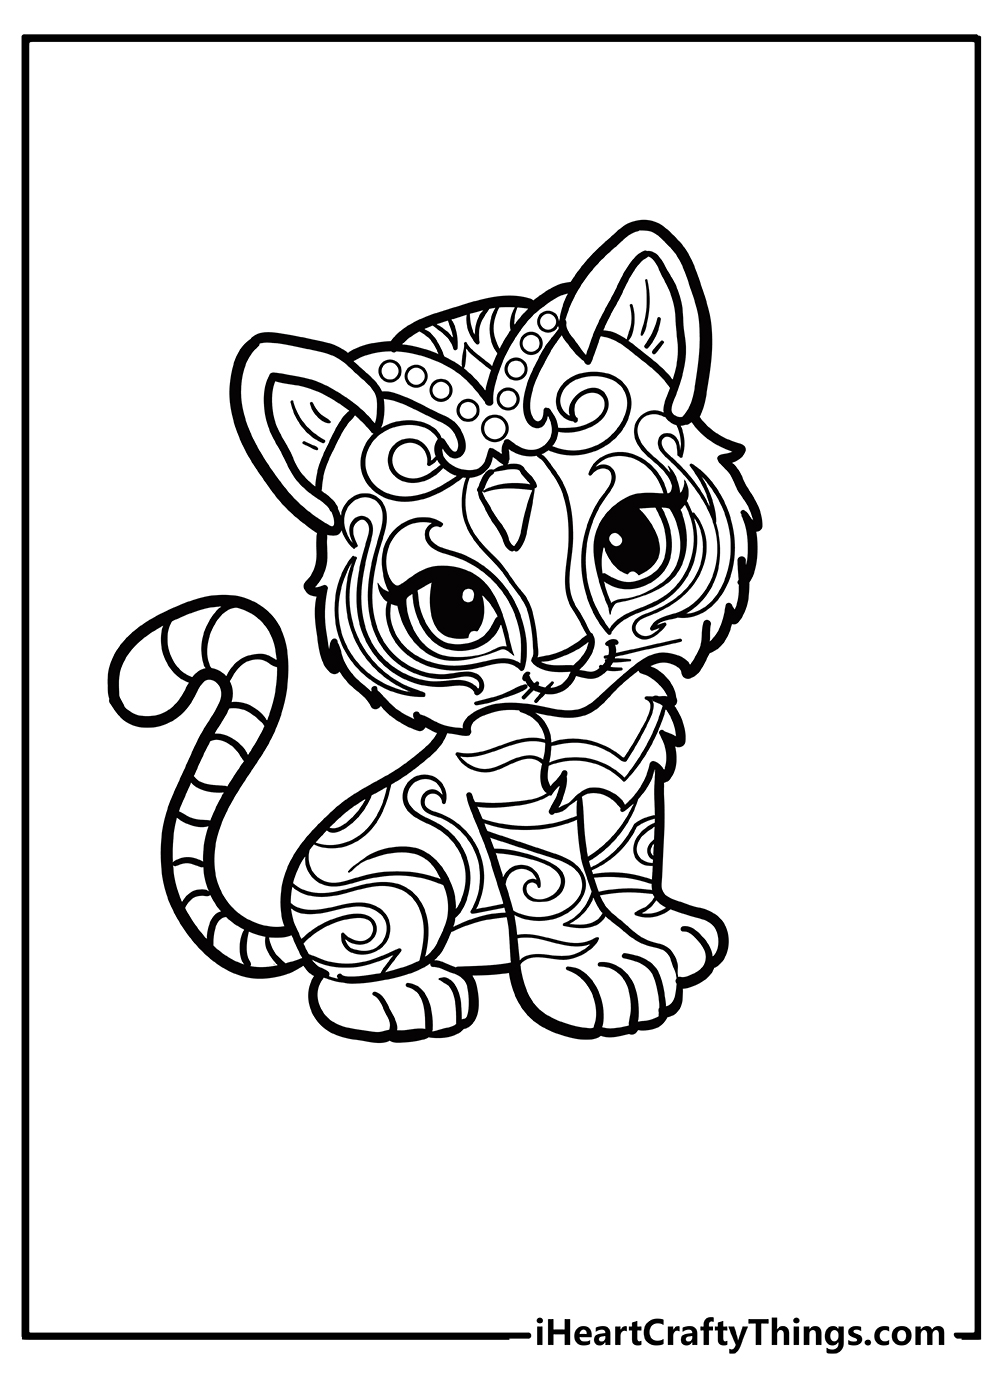 Shimmer and Shine Coloring Book for adults free download